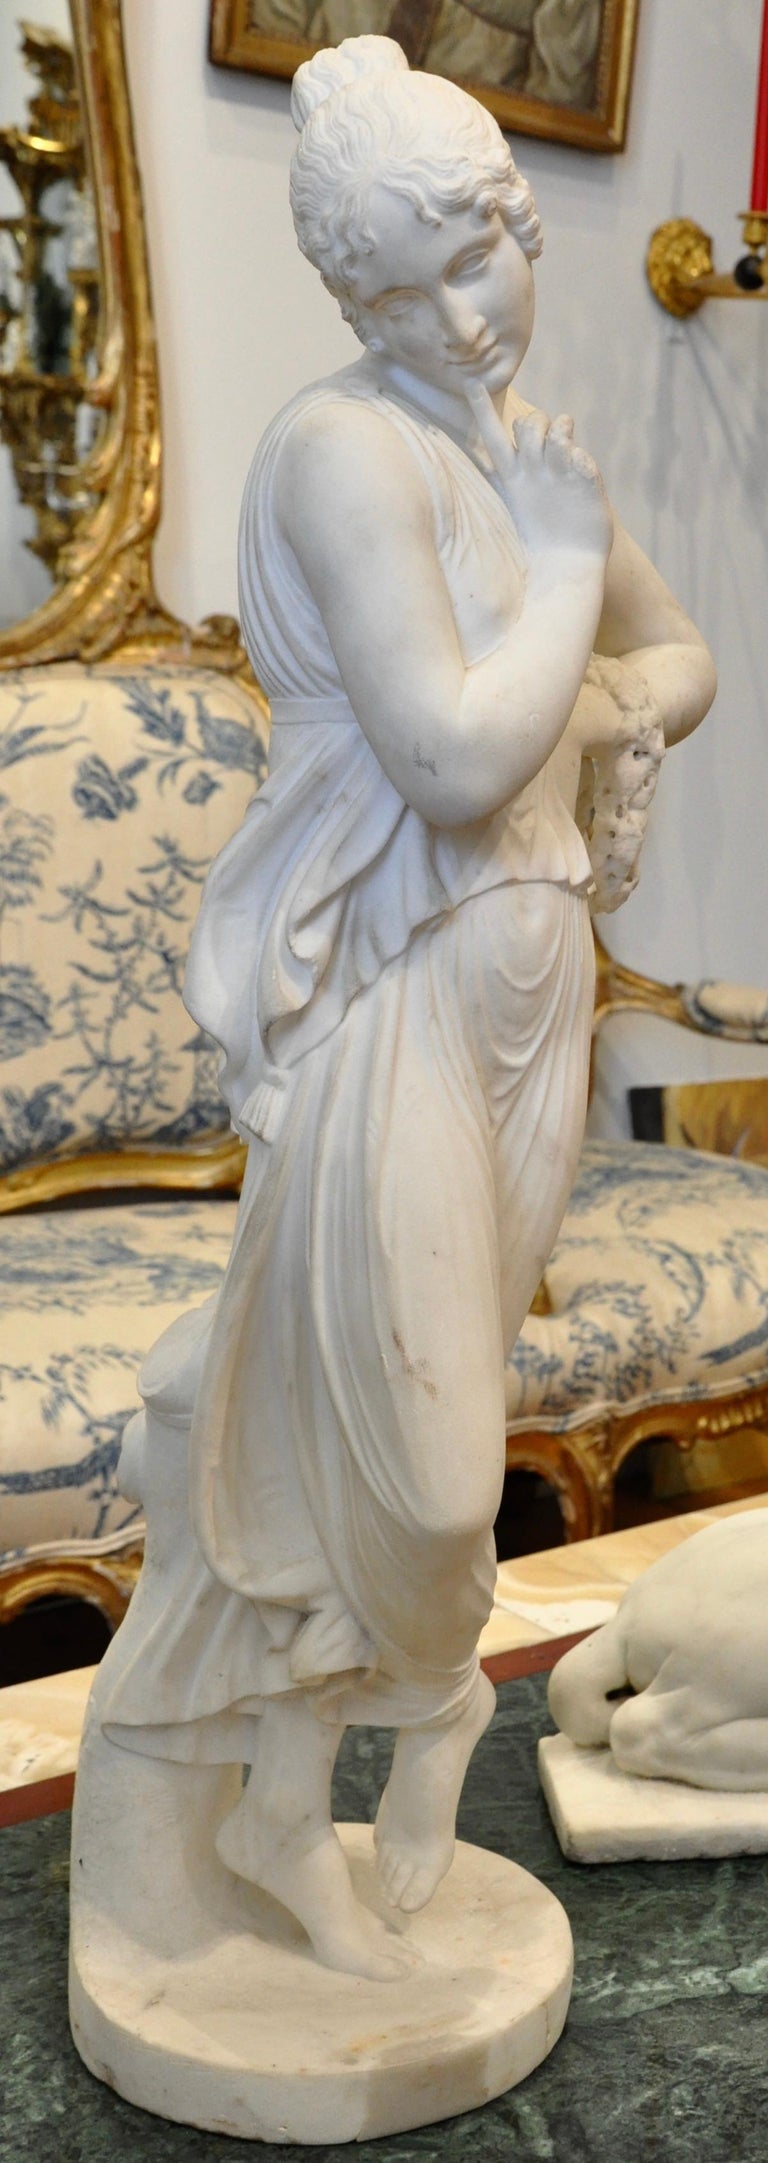 19th Century Neoclassical Carved Marble Statue of Canova's Dancing Woman For Sale 4